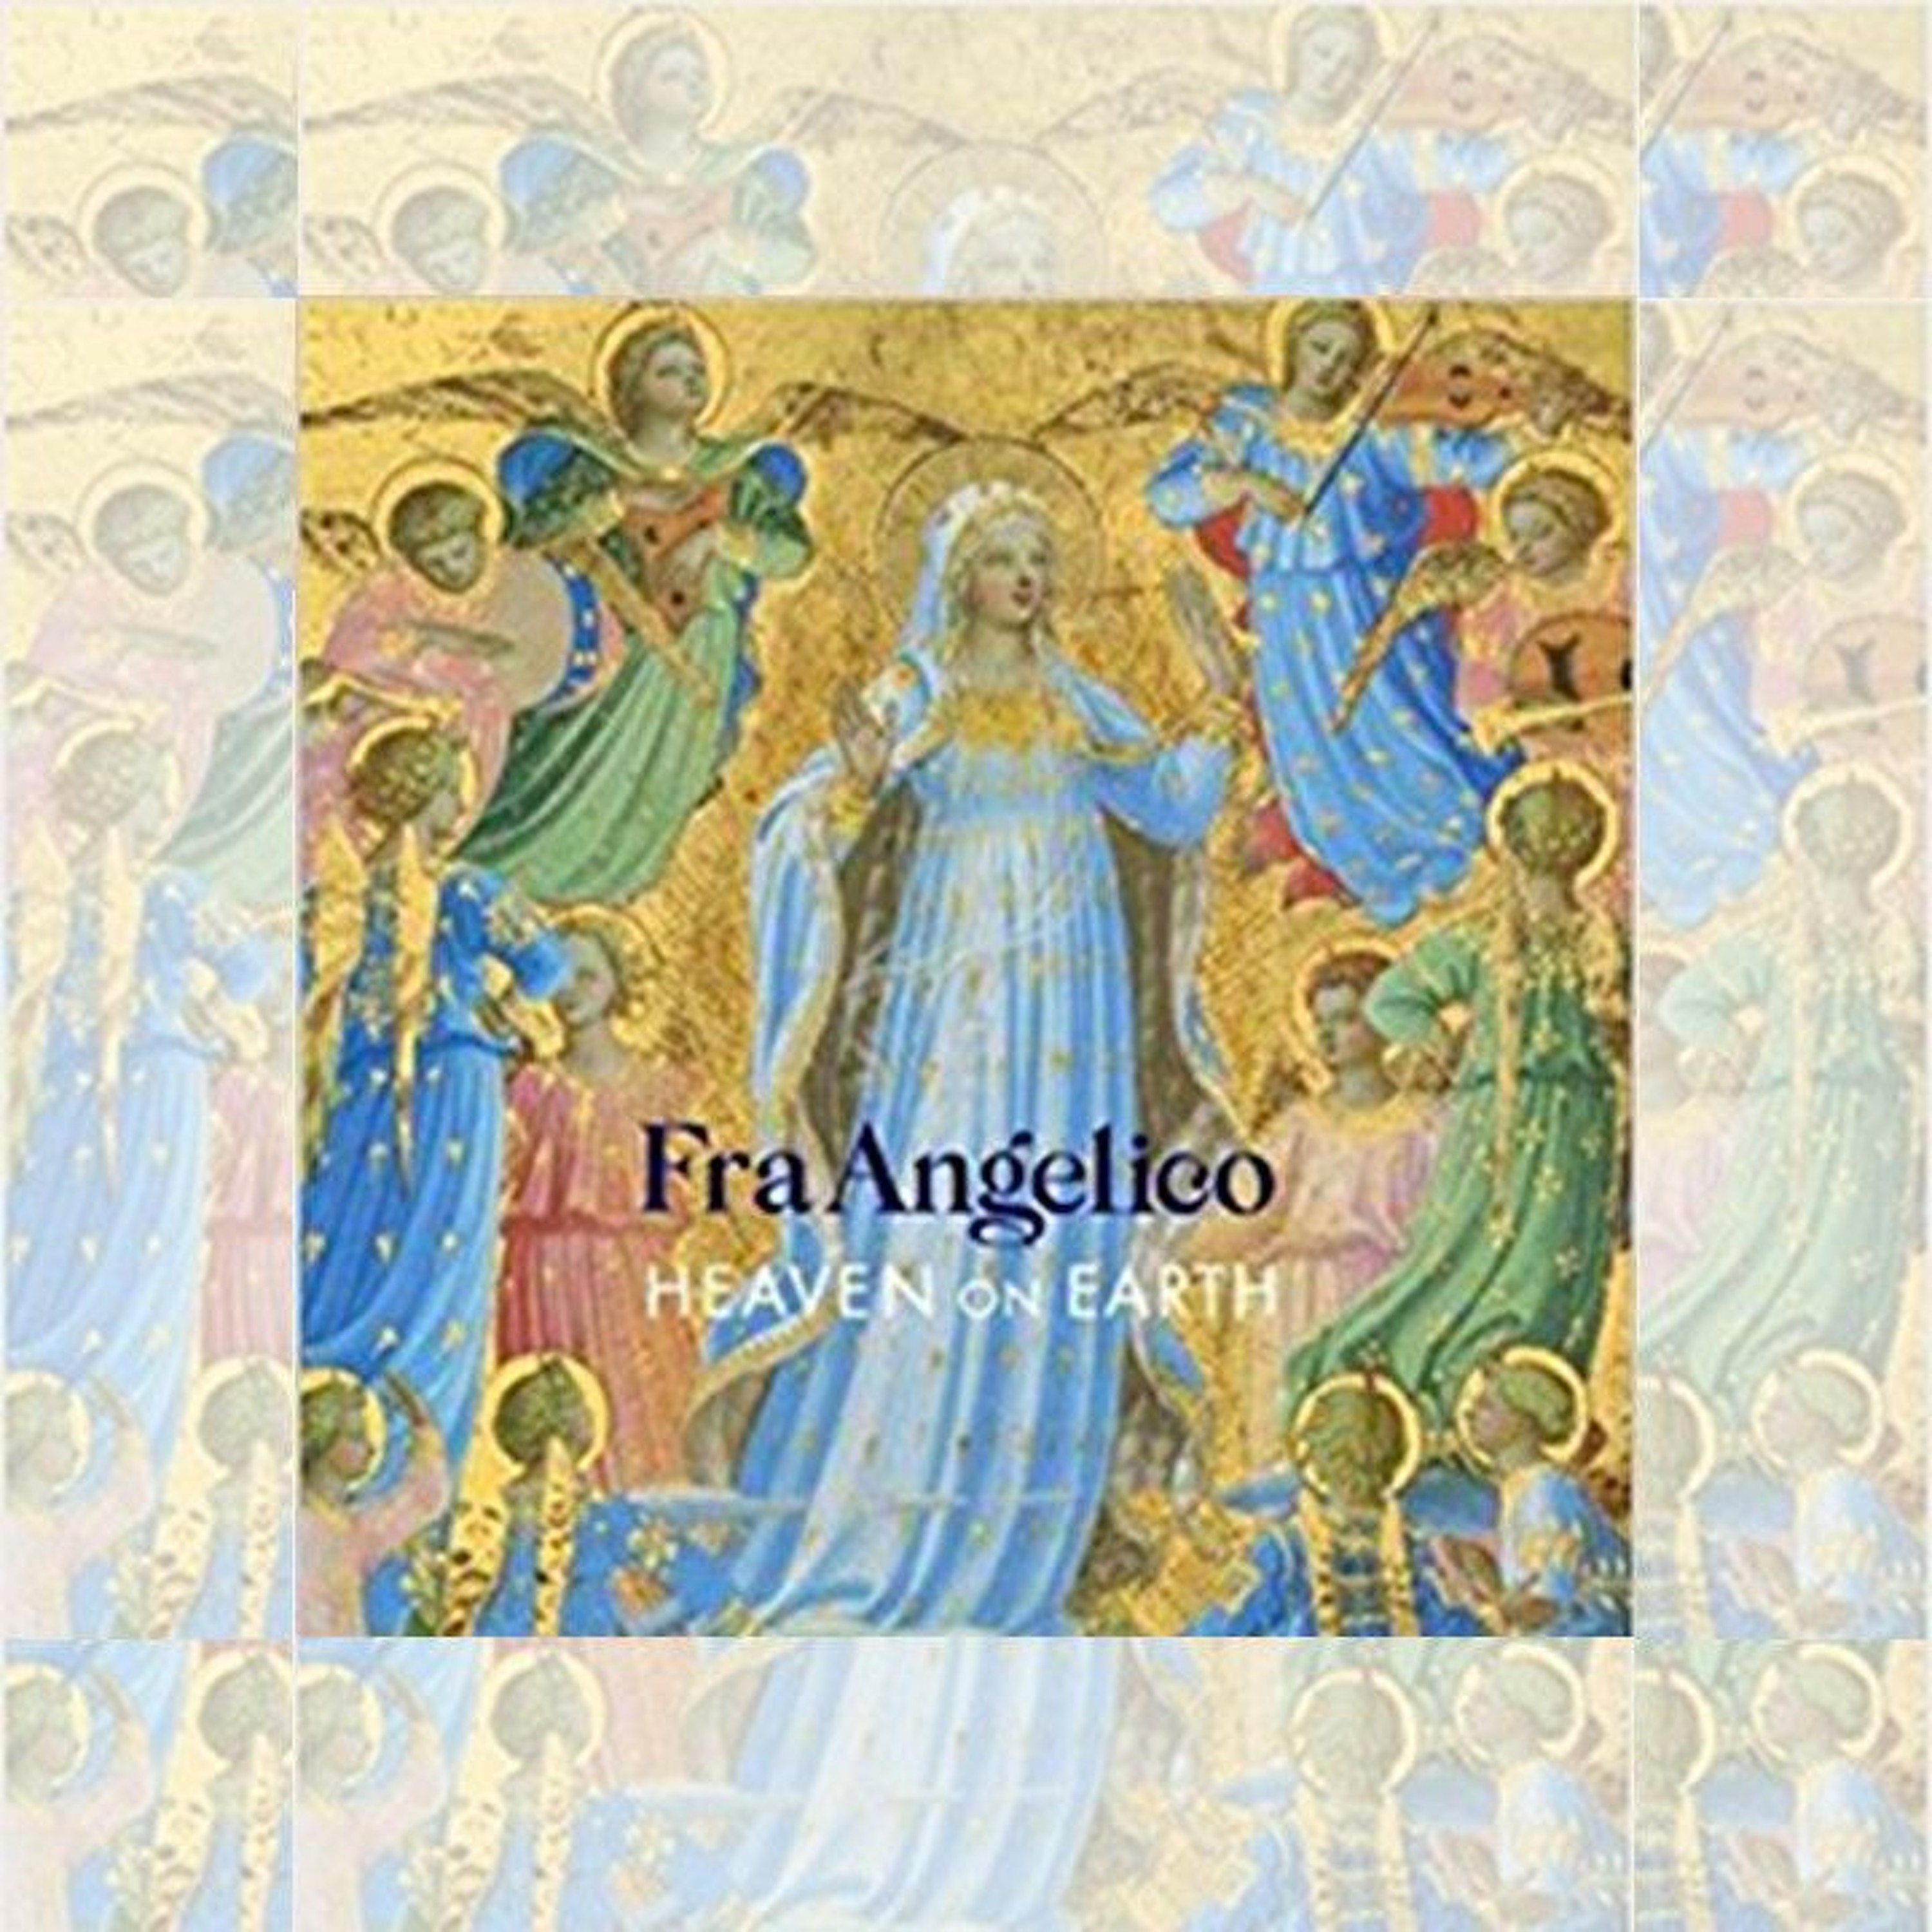 Nathaniel Silver, “Fra Angelico: Heaven on Earth”